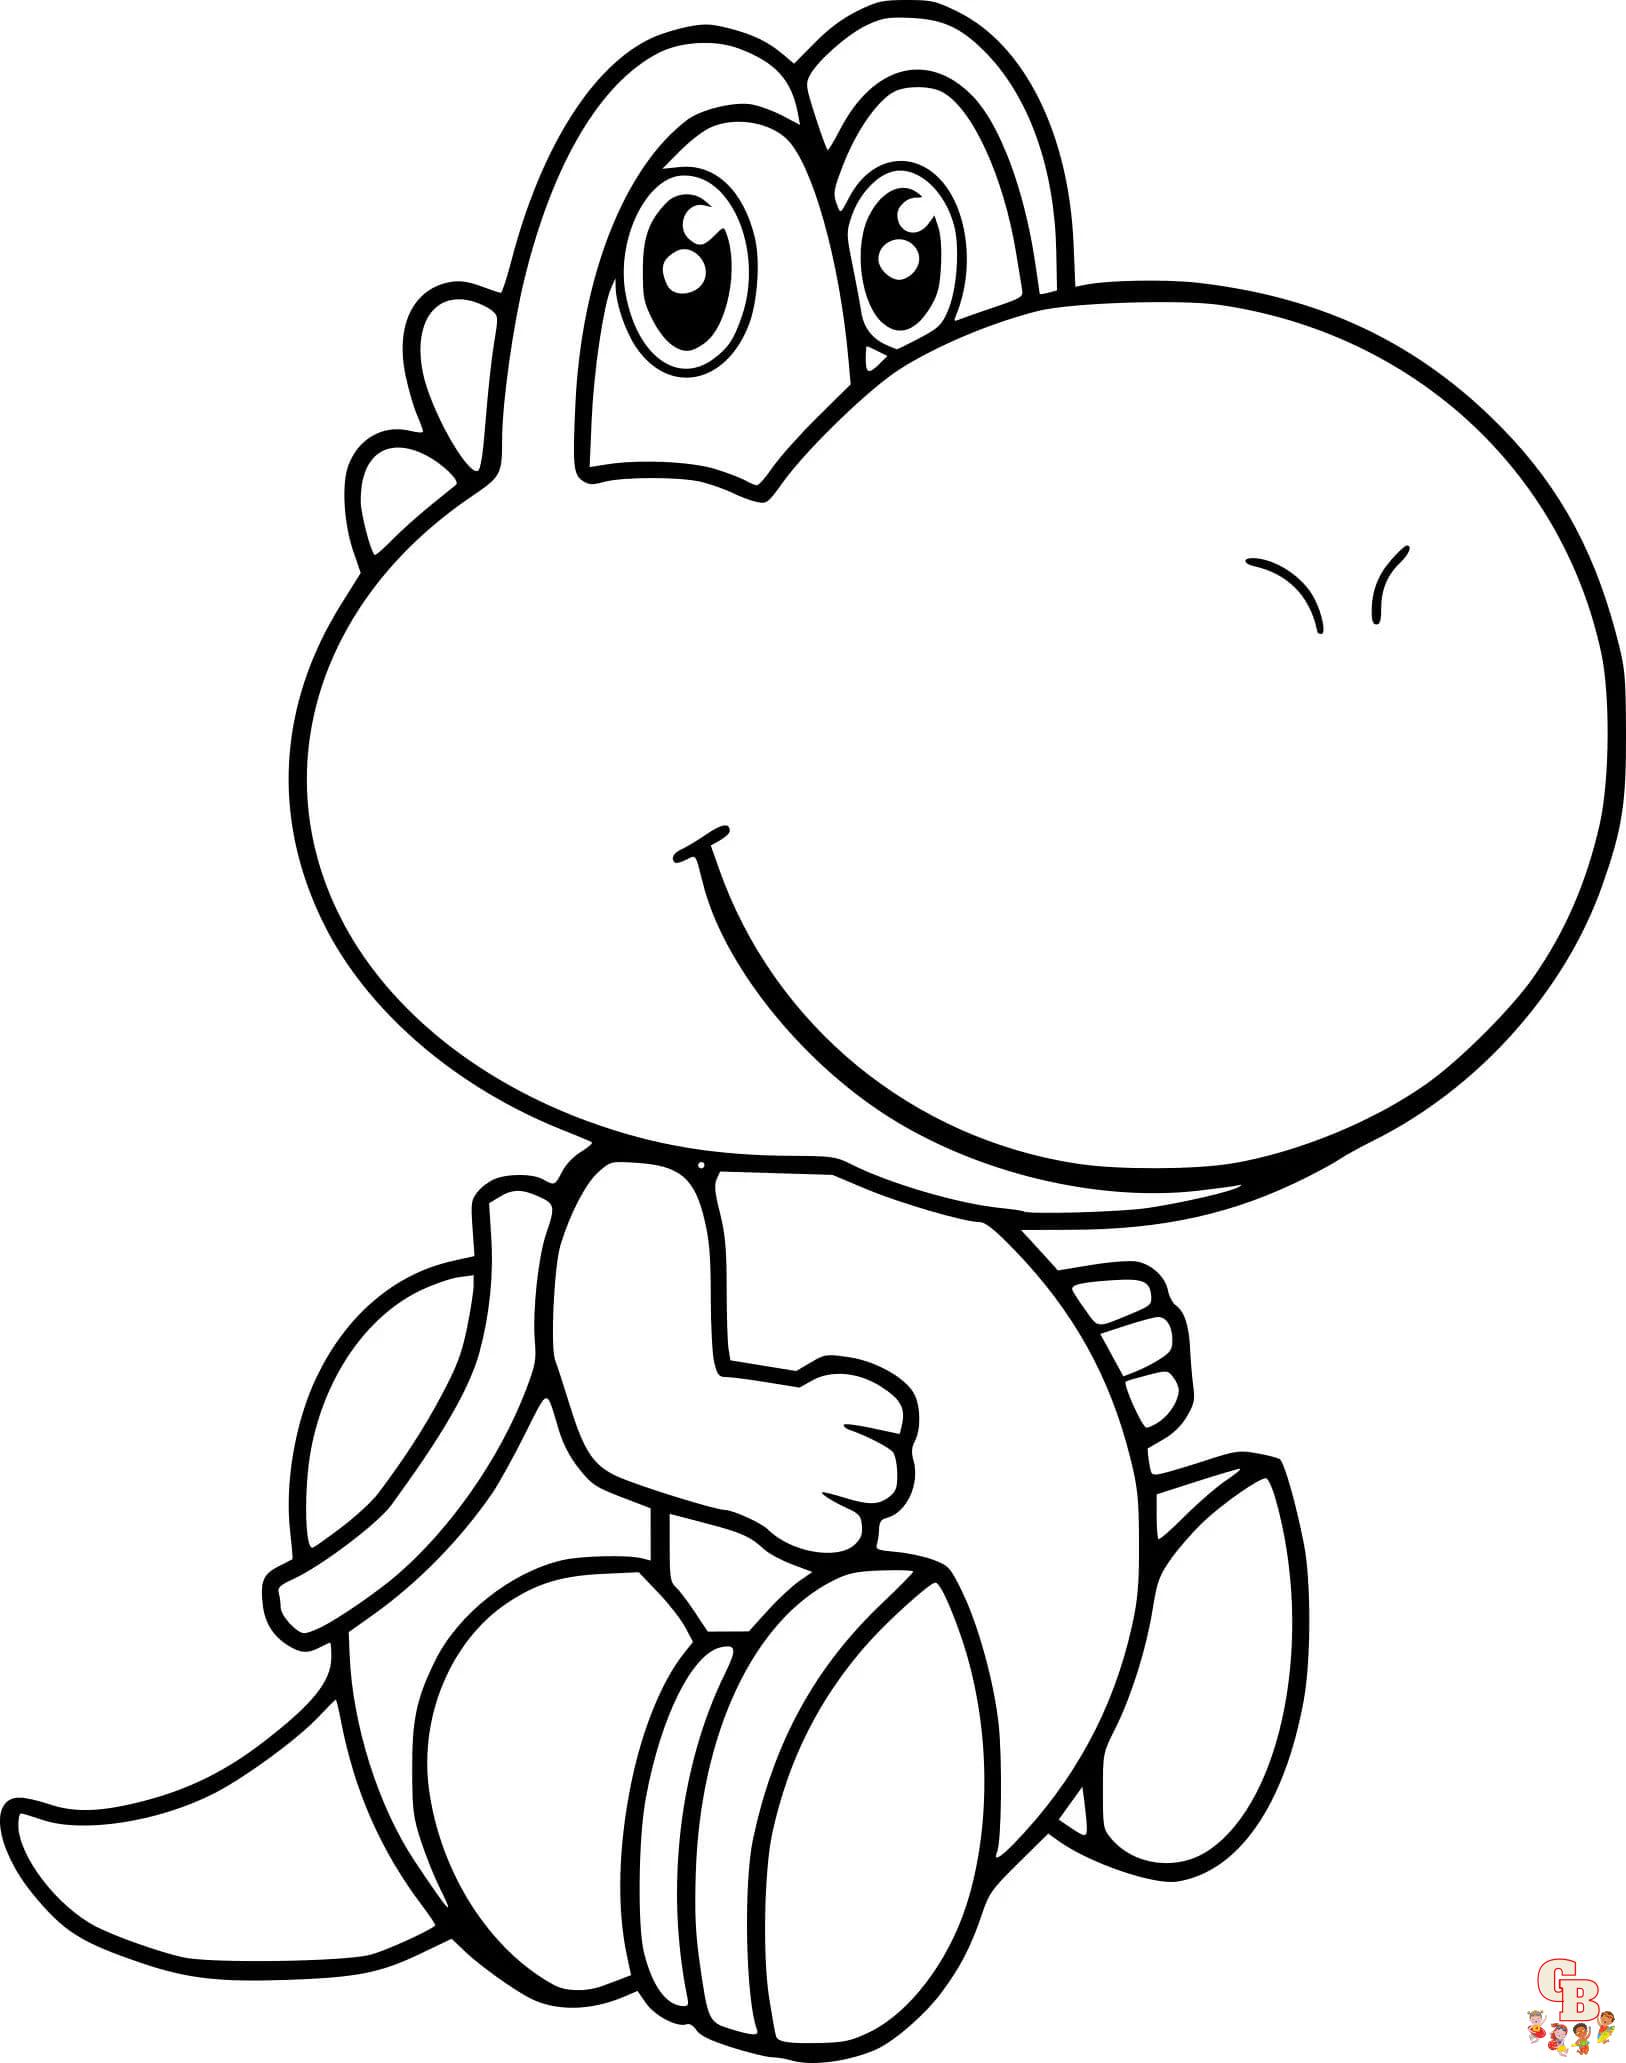 baby mario and friends coloring pages